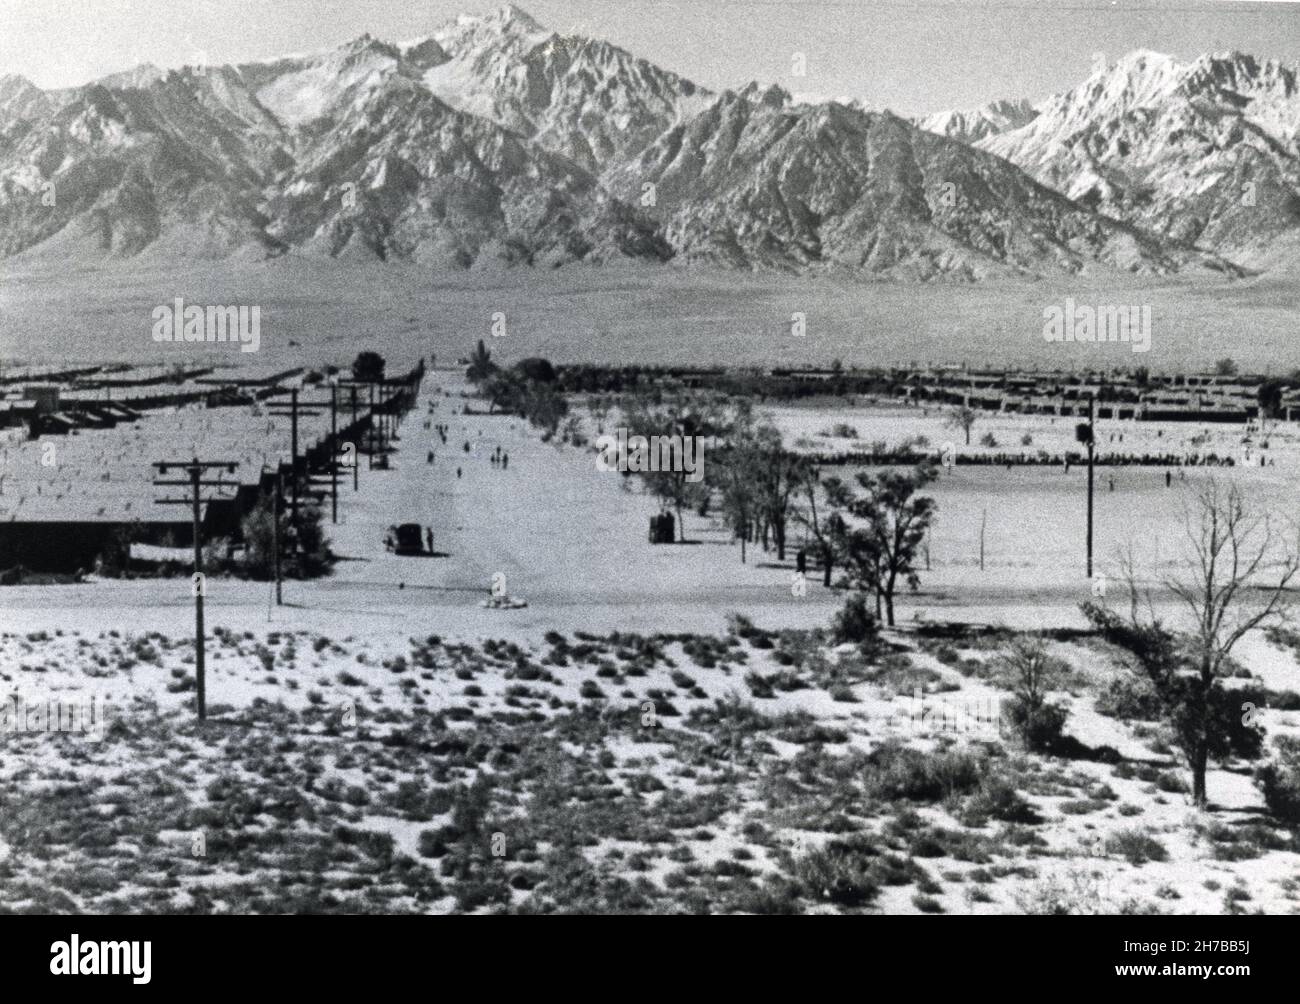 Photo of the Japanese WWII internment camp at Manzanar in Owens Valley, California photographed by American photographer Ansel Adams. In “Born Free and Equal” Ansel Adams described Manzanar as a “city built of shacks and patience. Stock Photo